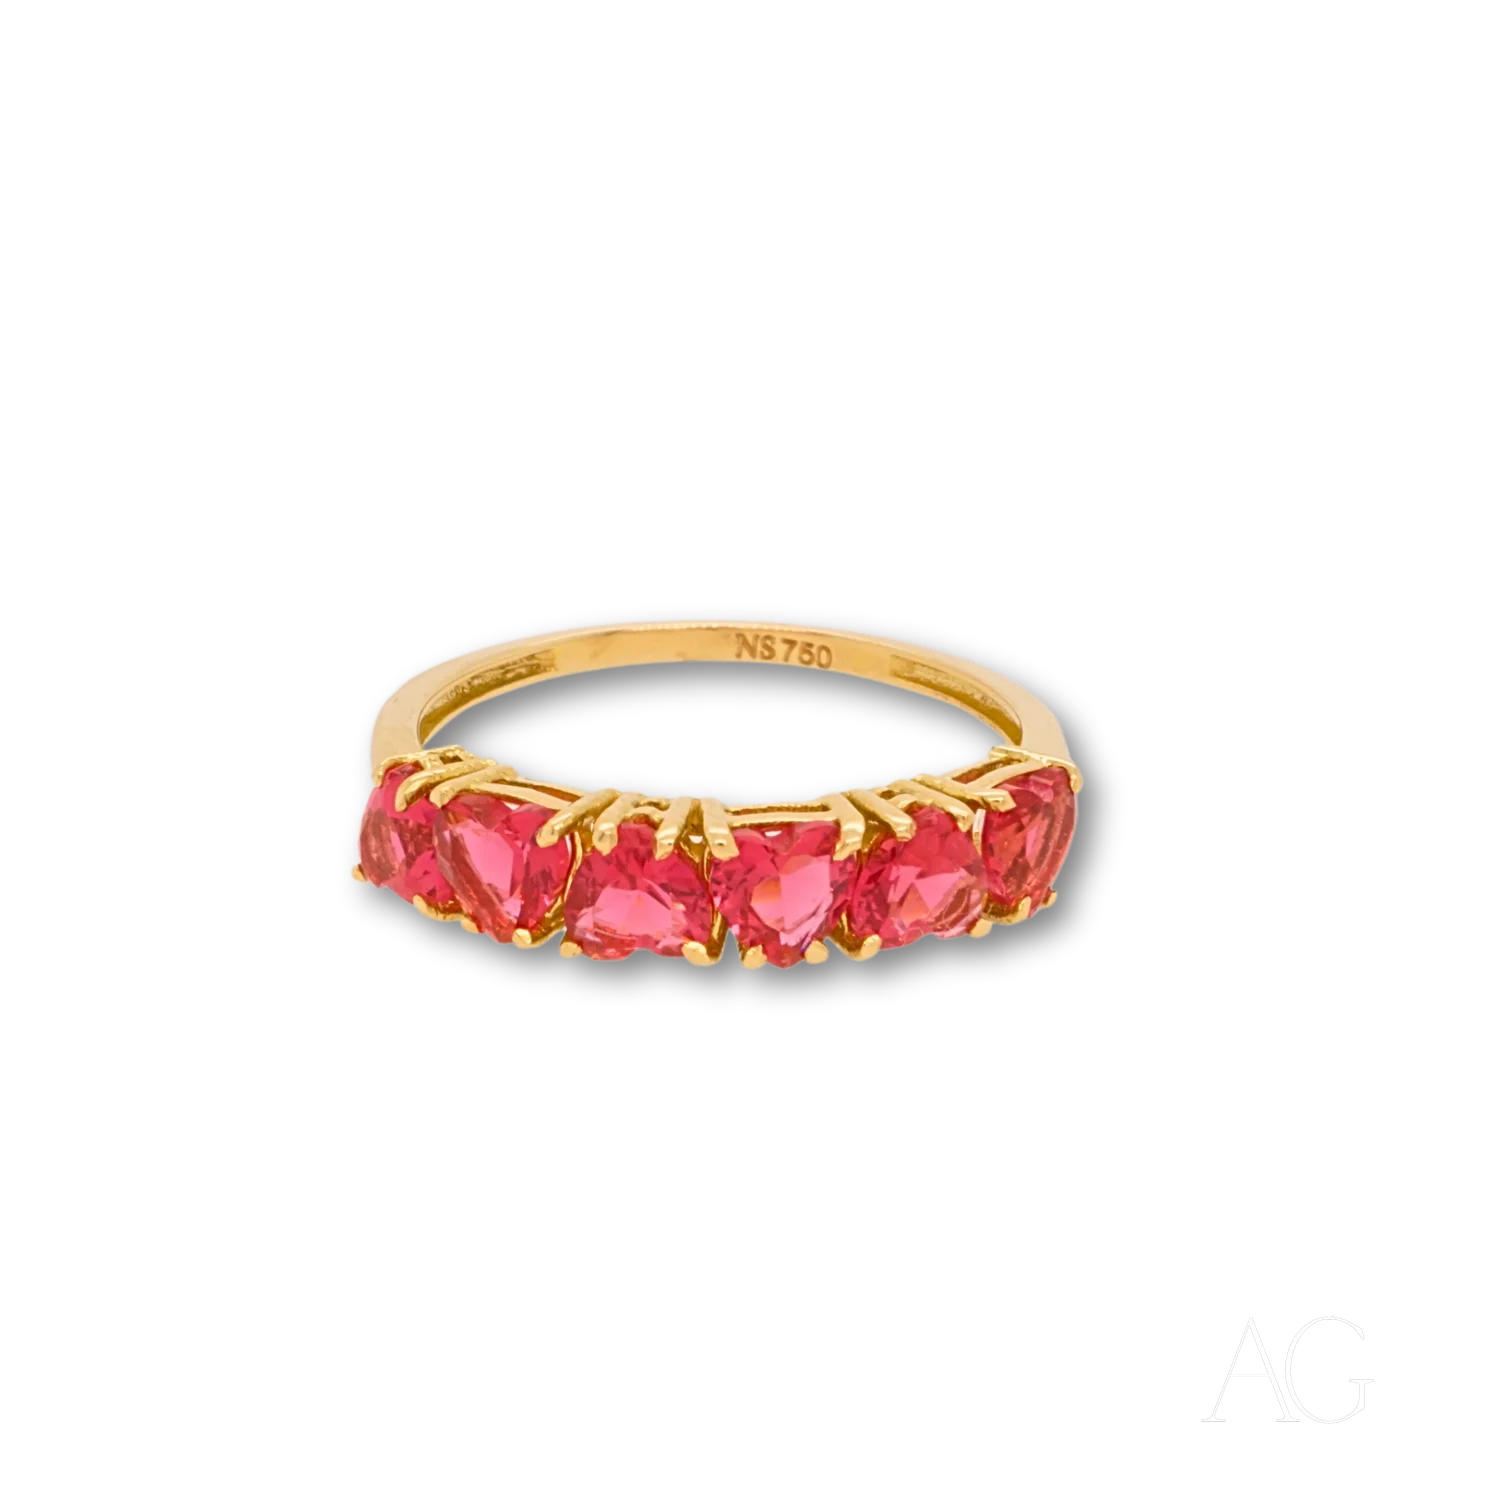 Passion flame 18k gold ring with red cz stones | Rings